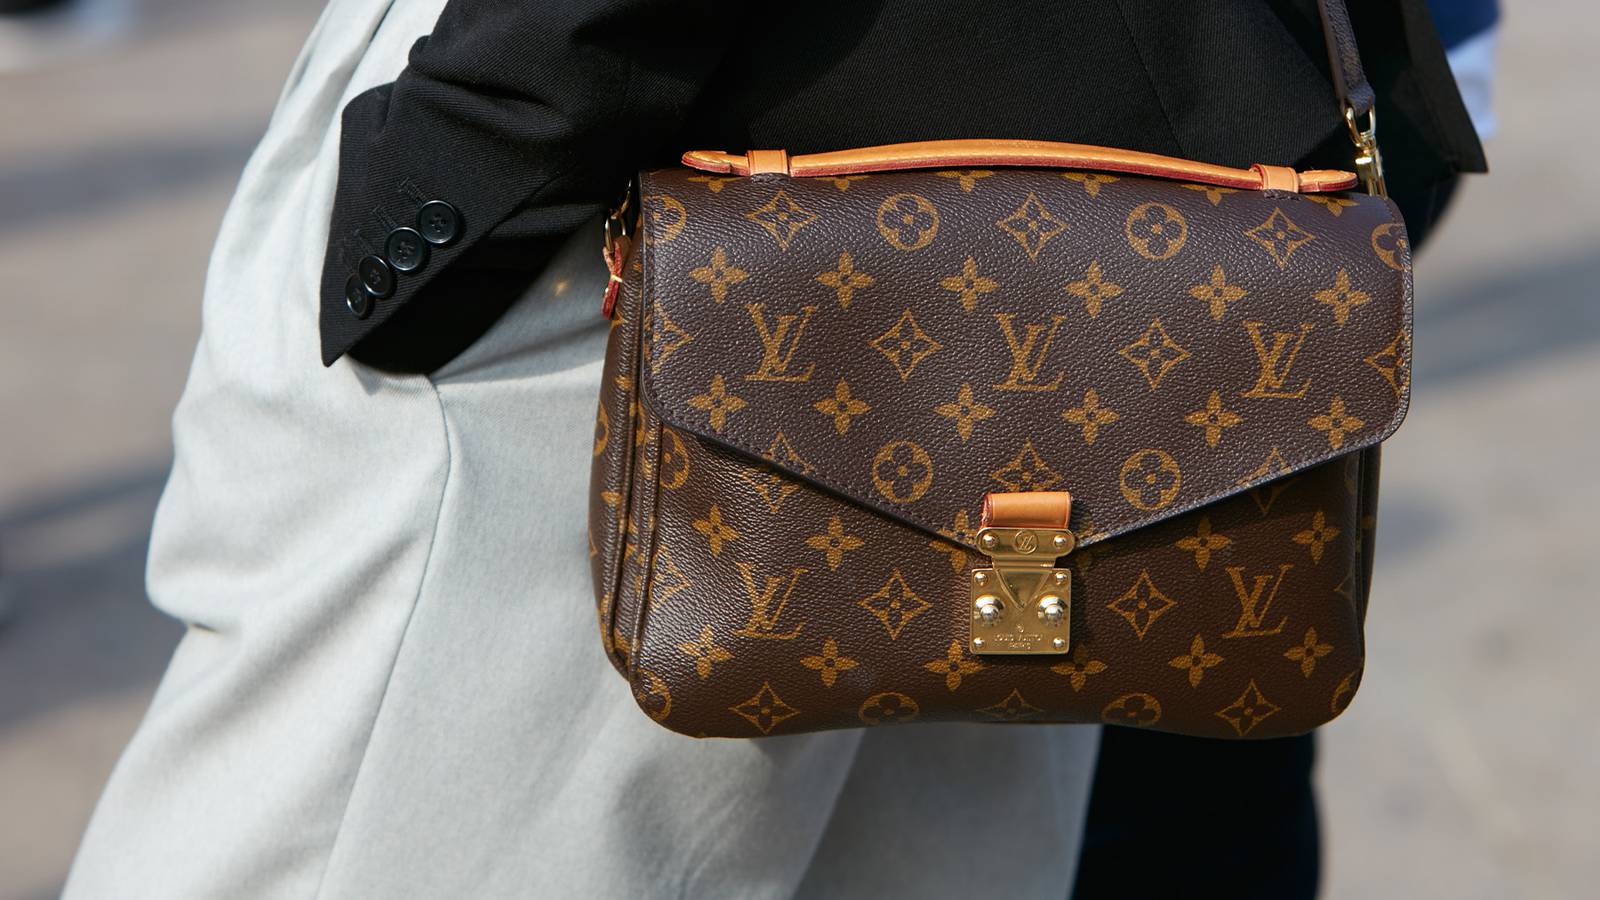 LVMH is now first European company with market value of over USD 500B